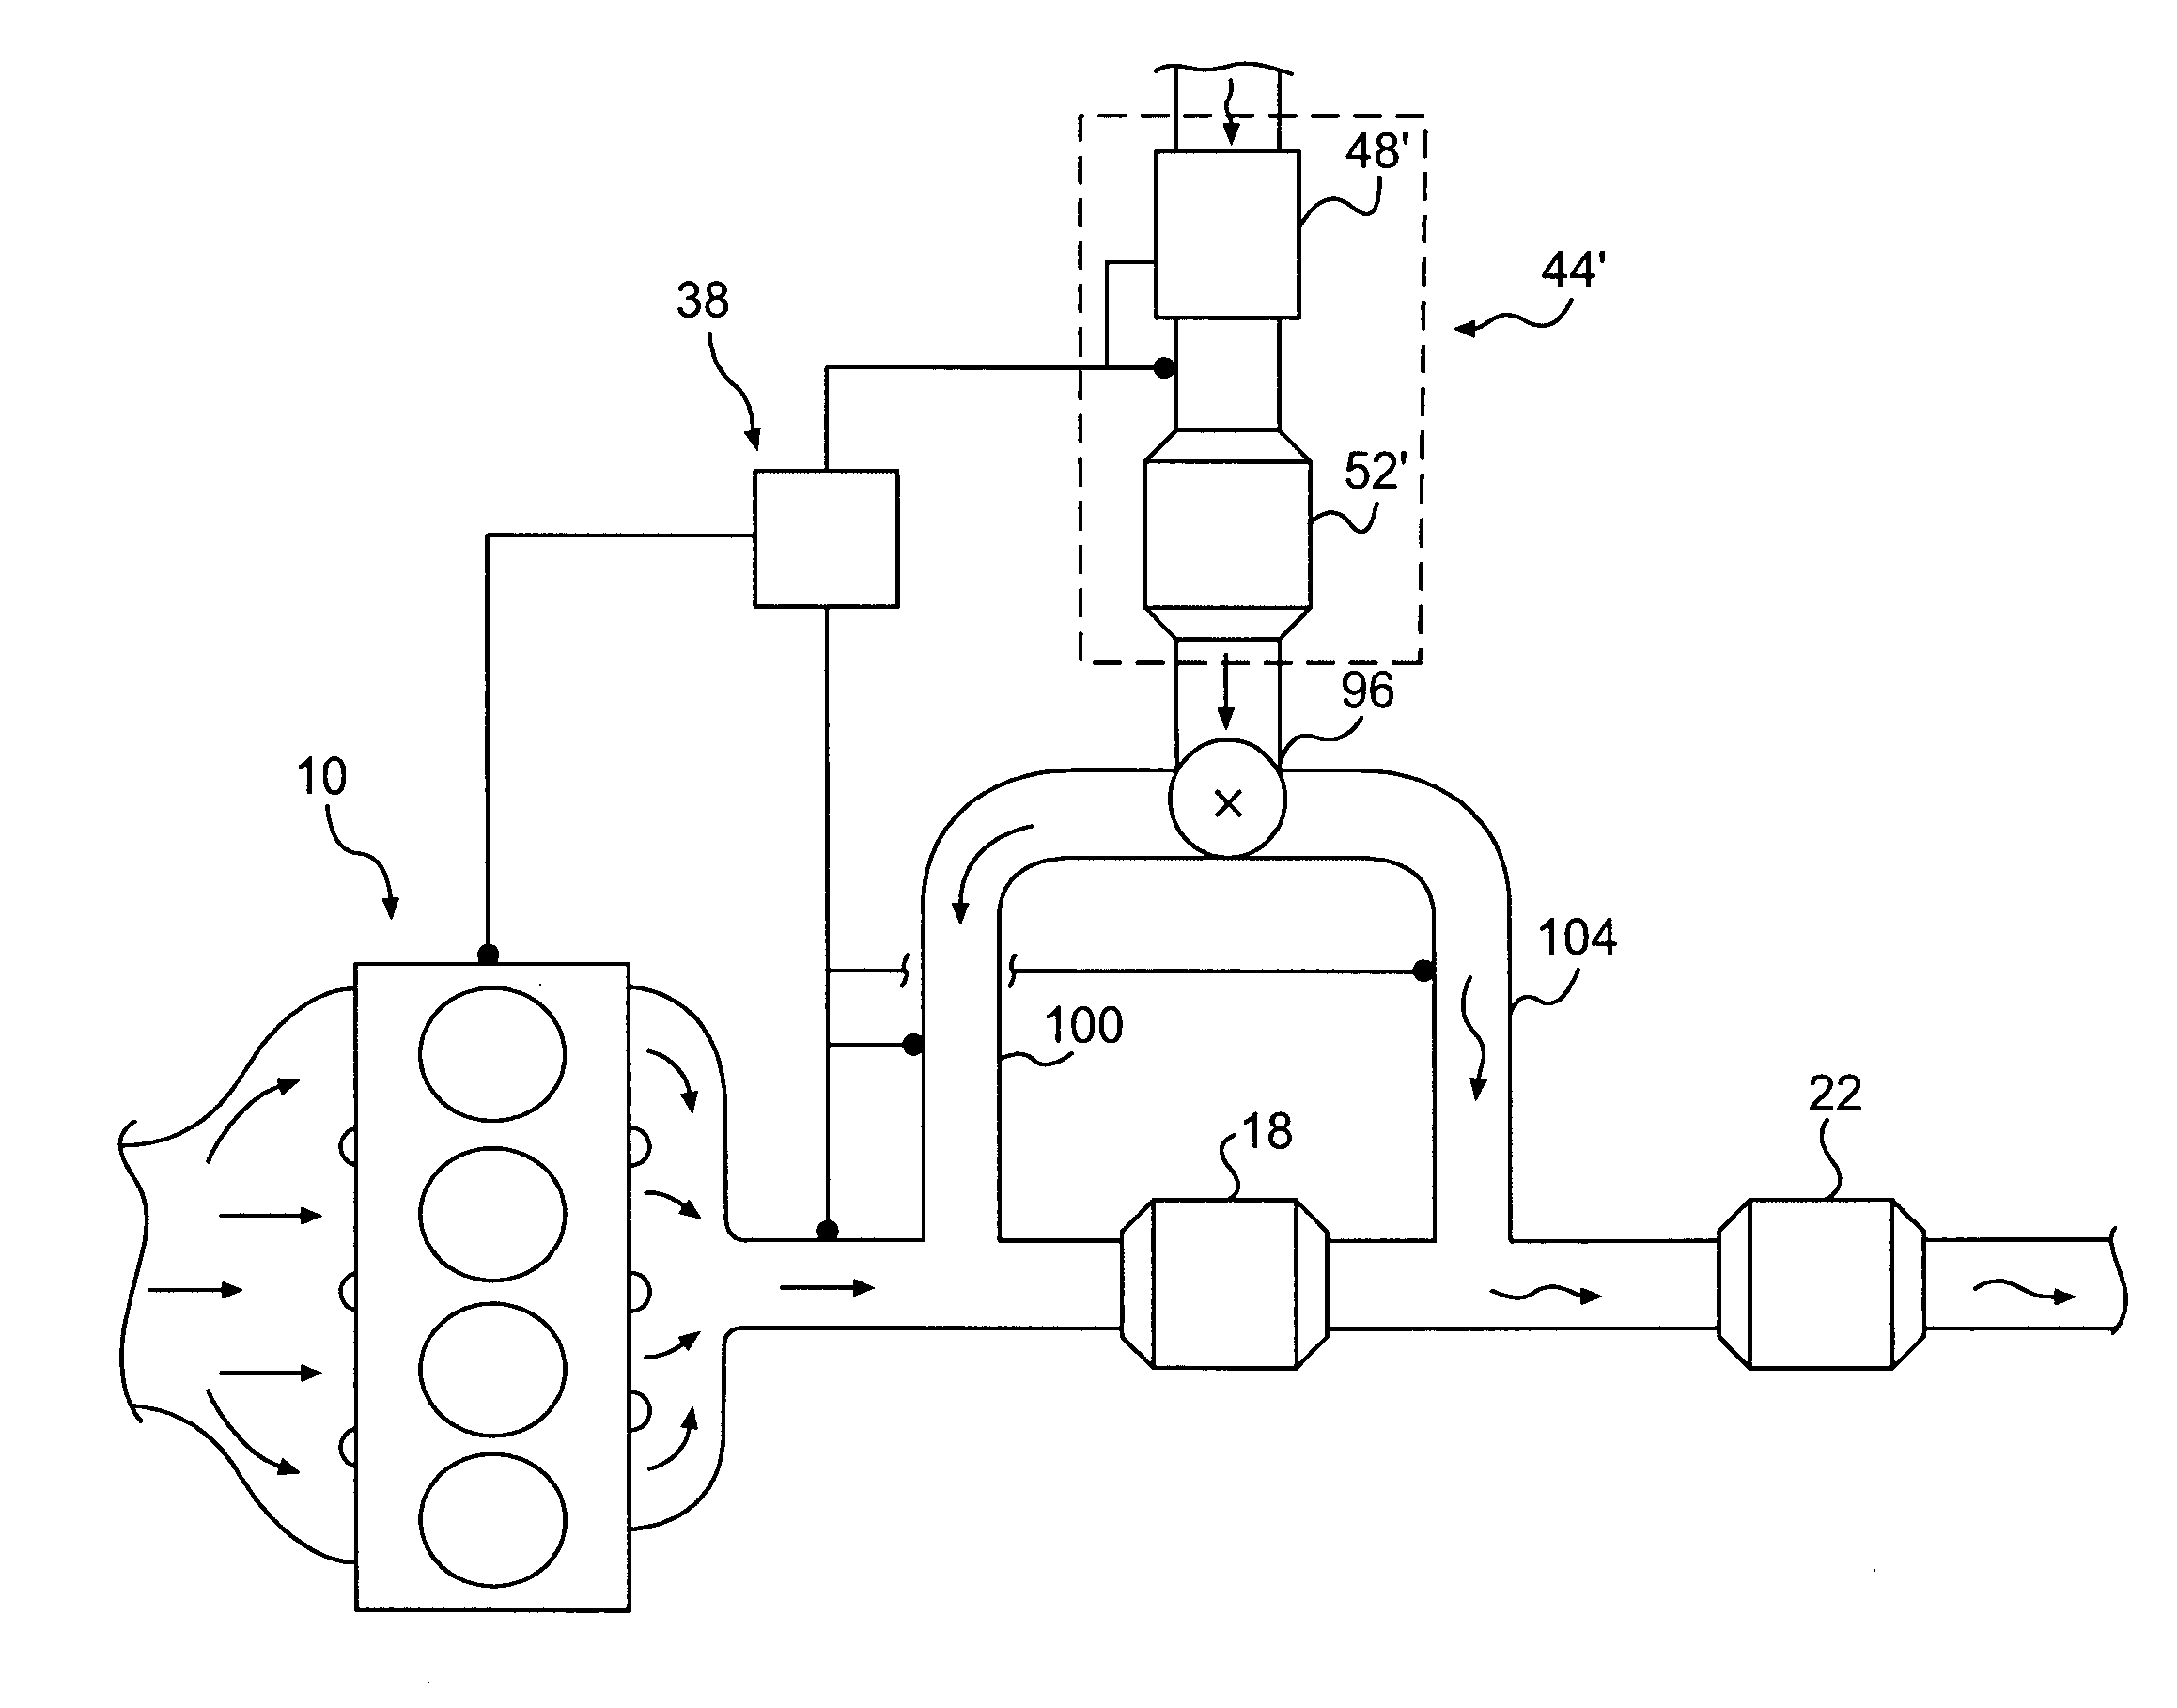 Multi-stage system for selective catalytic reduction